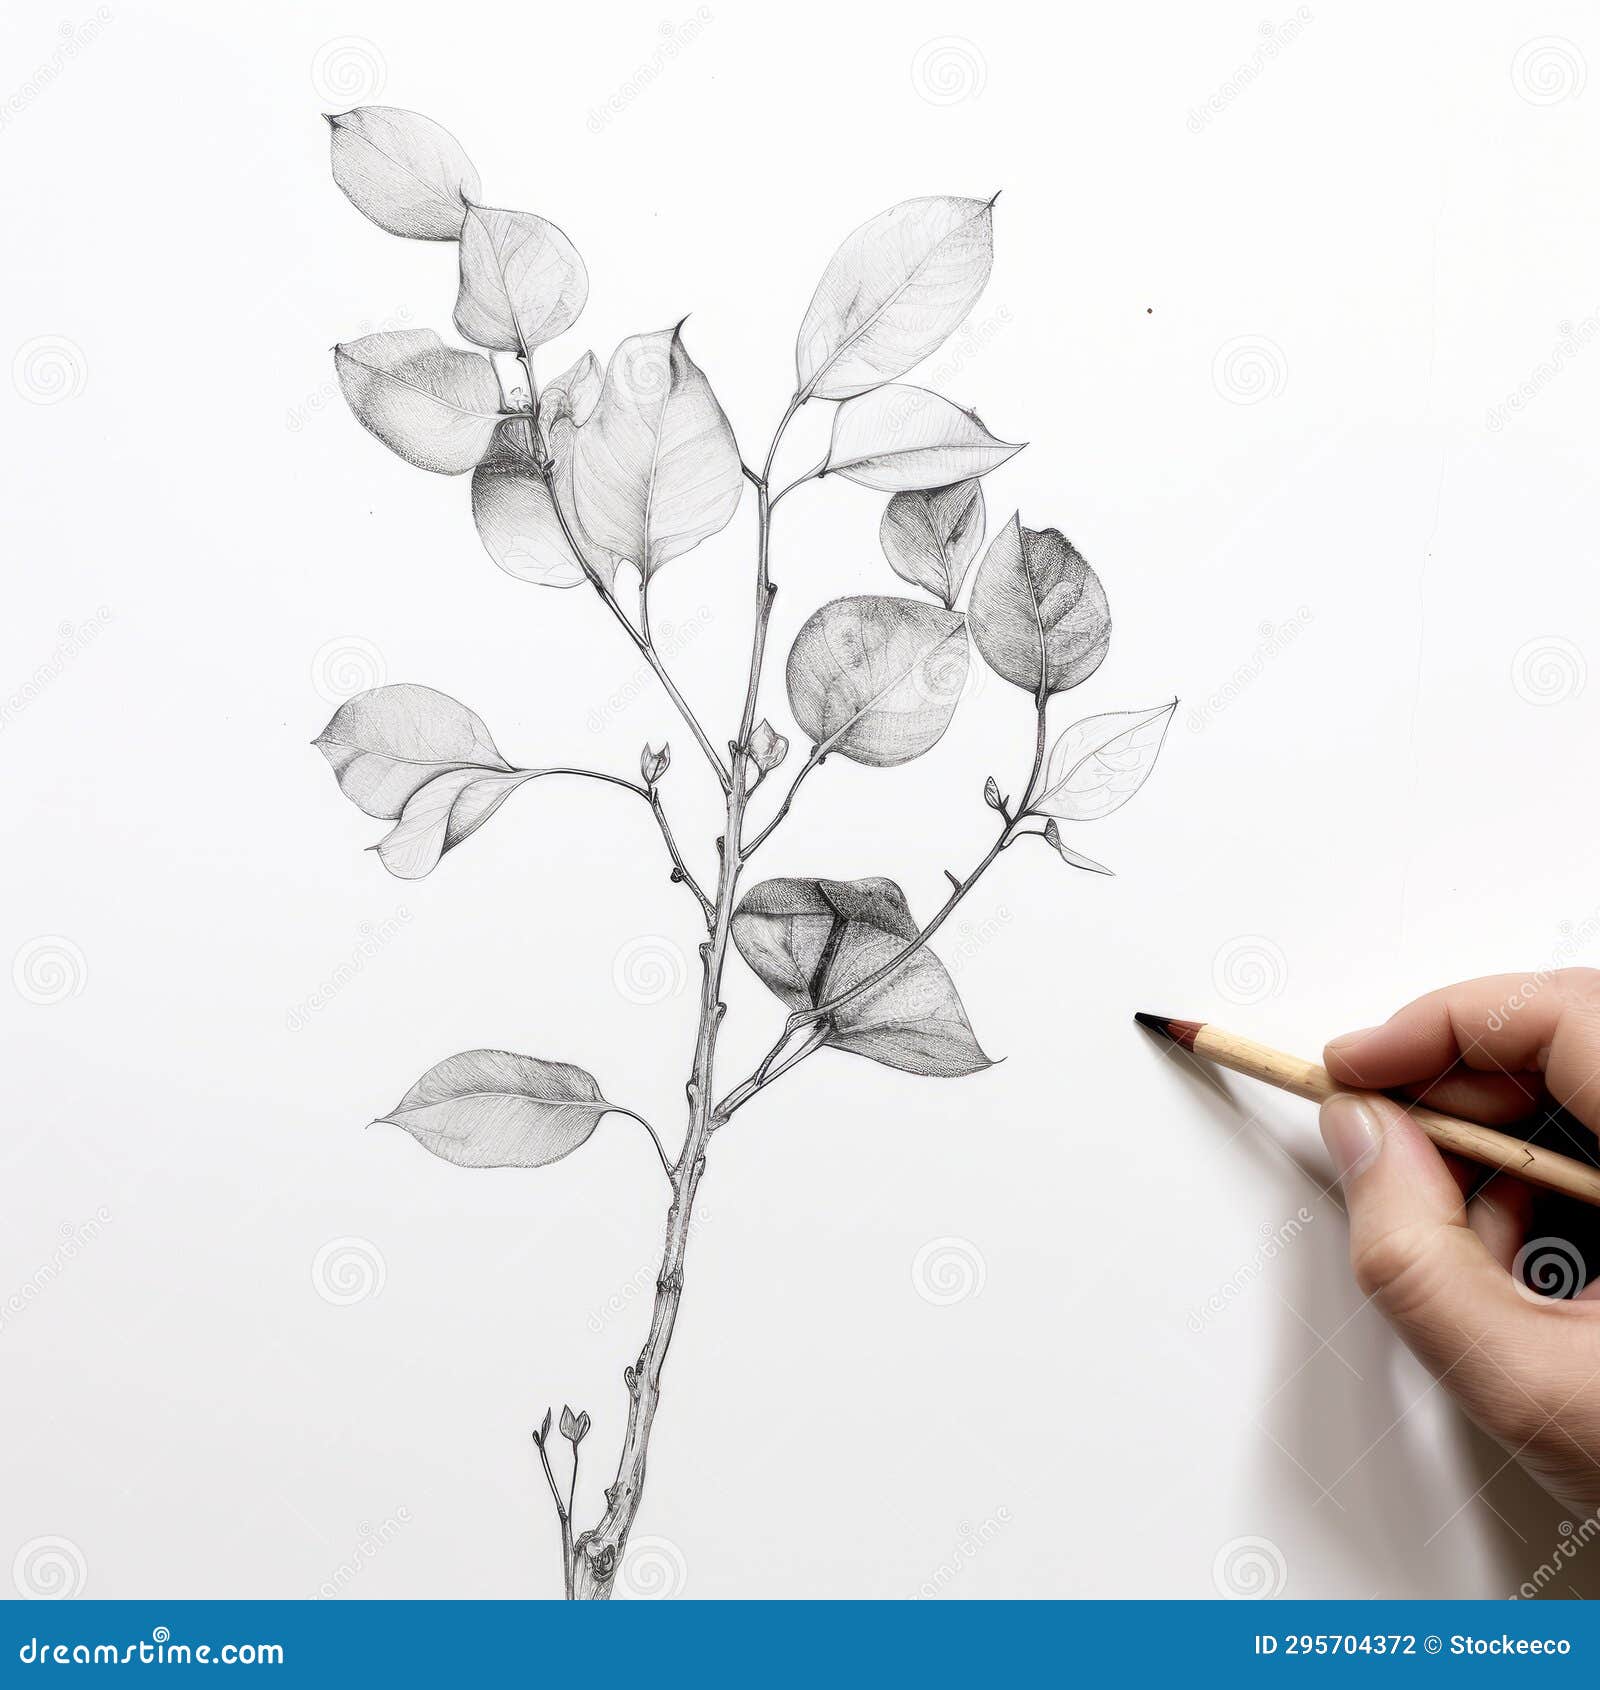 simple and incomplete eucalyptus drawing on white background